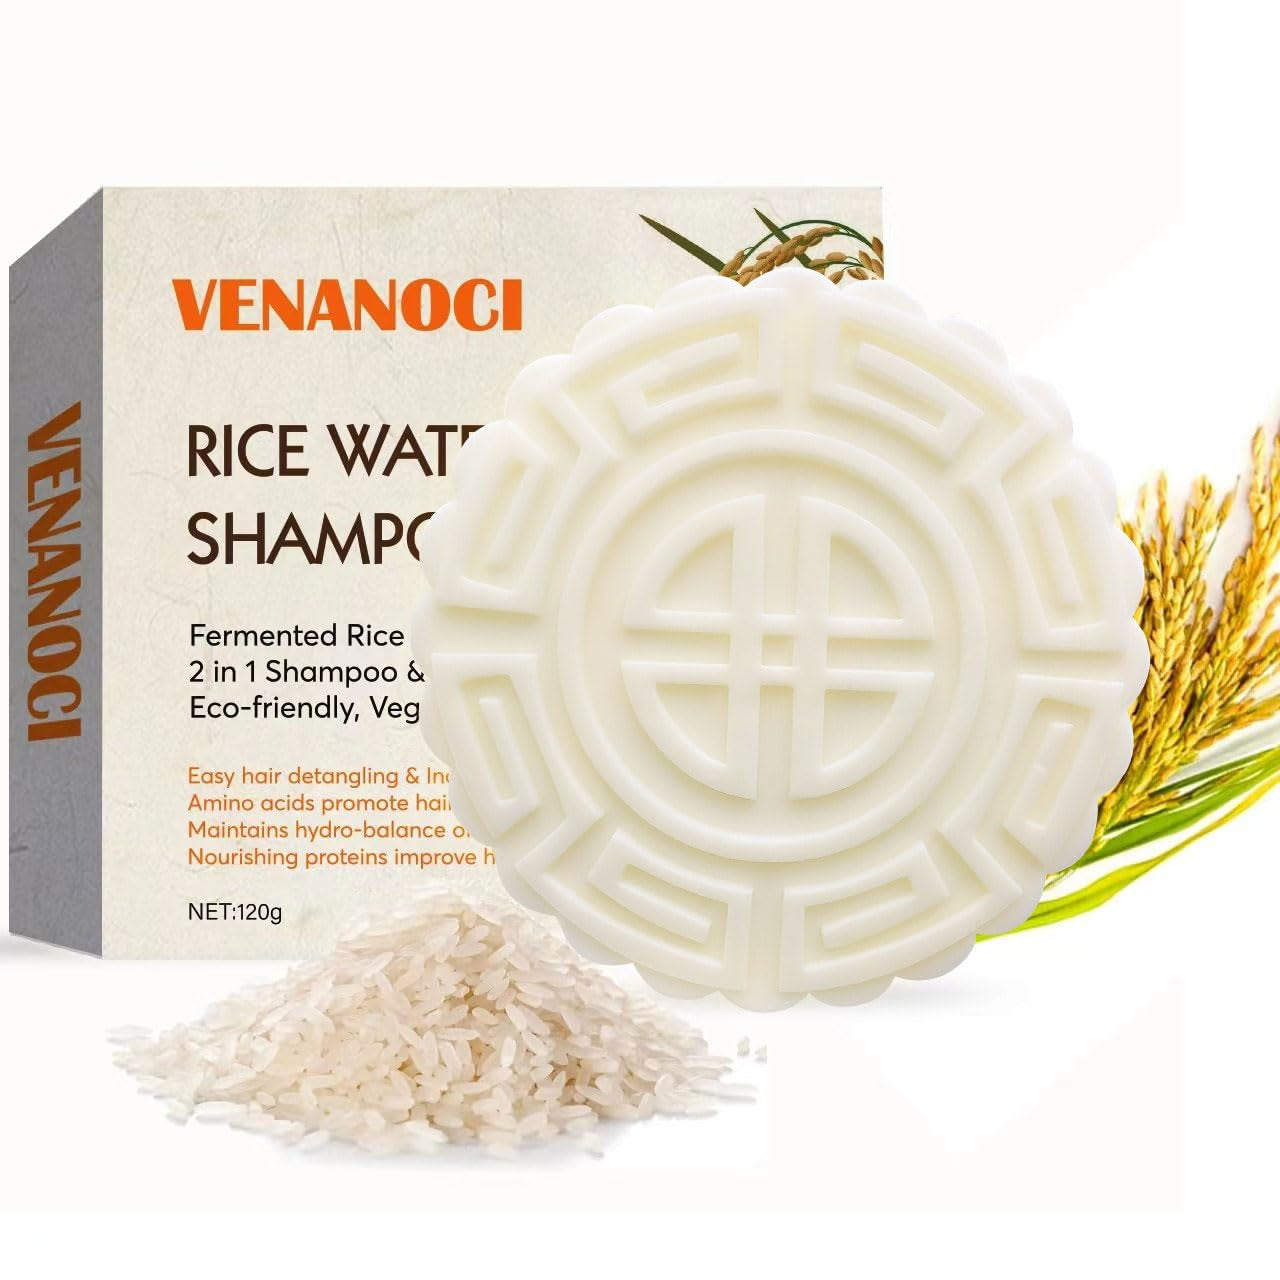 Rice Water for Hair Growth Shampoo Bar, 2 in 1 Fermented Rice Water Shampoo and Conditioner Bar for Hair Growth, Vegan Origin Growth anti Hair Loss Rice Water Shampoo Bar, Solid Rice Bar Soap for Hair Growth All-Natural